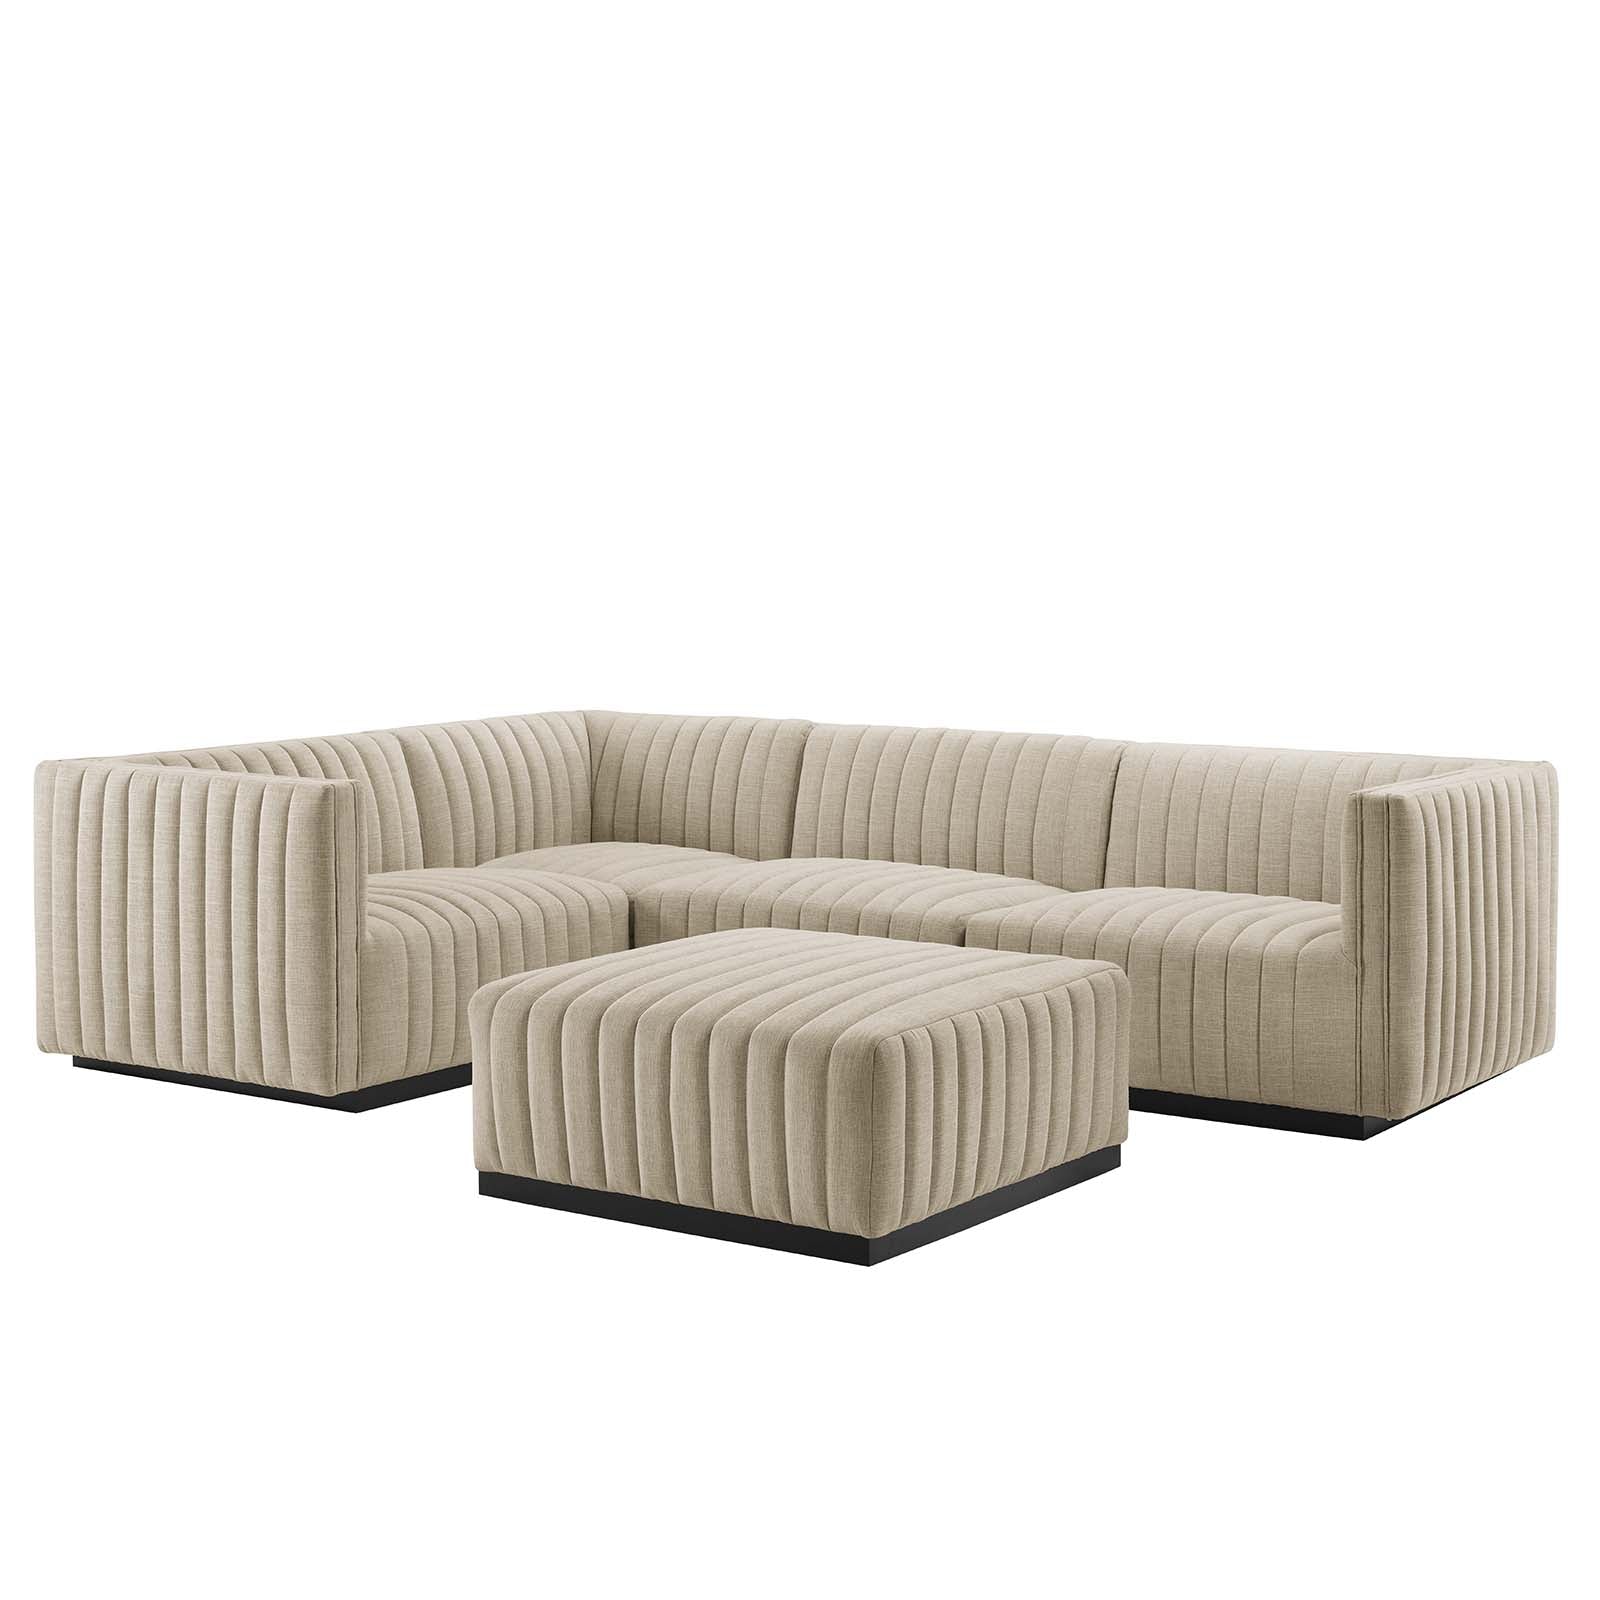 Modway Sectional Sofas - Conjure Channel 119 " L Tufted Upholstered Fabric 5-Piece Sectional Black Beige